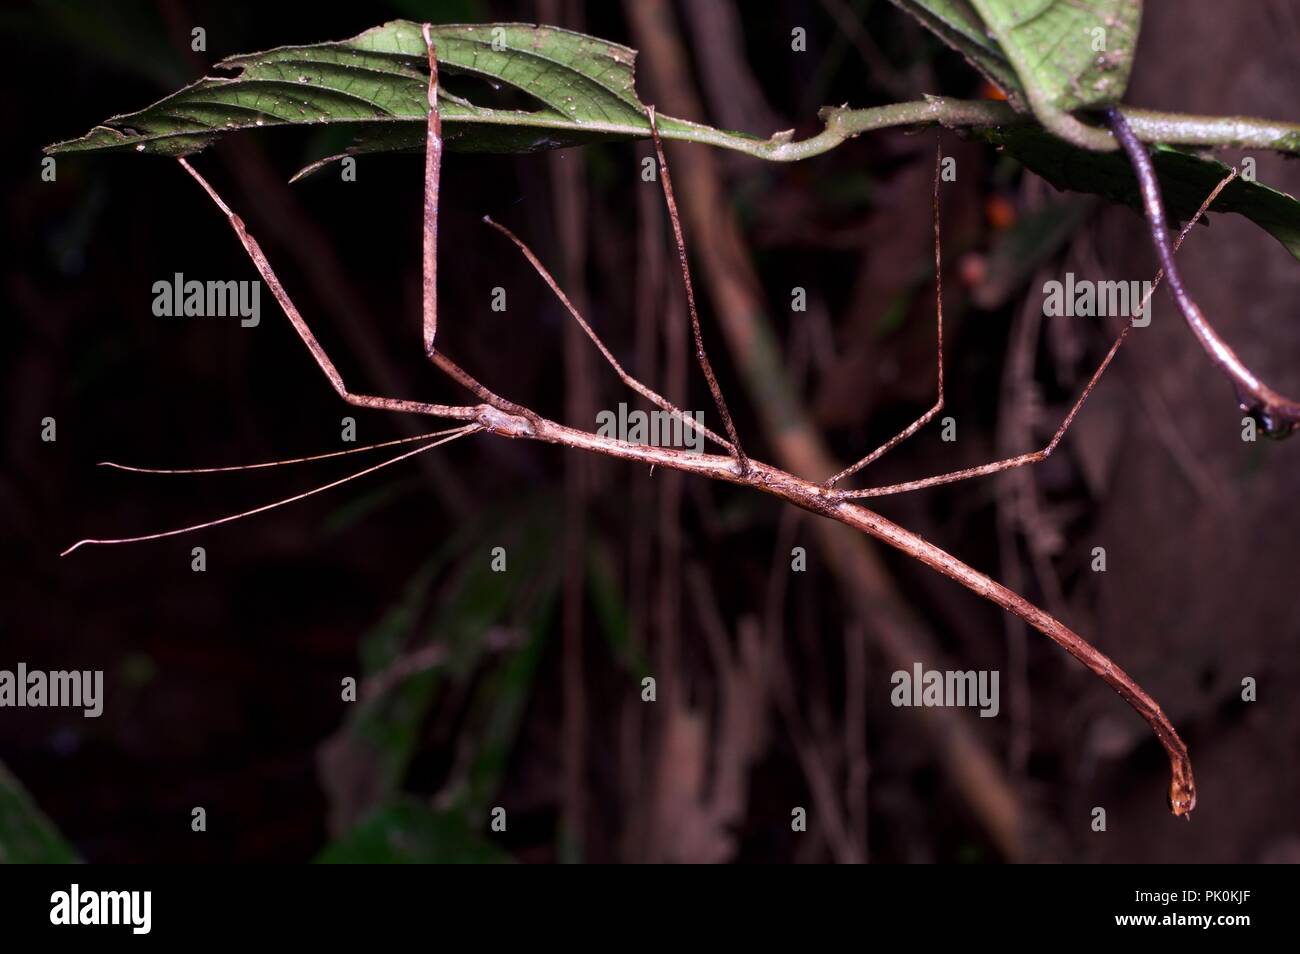 A phasmid (stick insect) in the rainforest at night in Gunung Mulu National Park, Sarawak, East Malaysia, Borneo Stock Photo